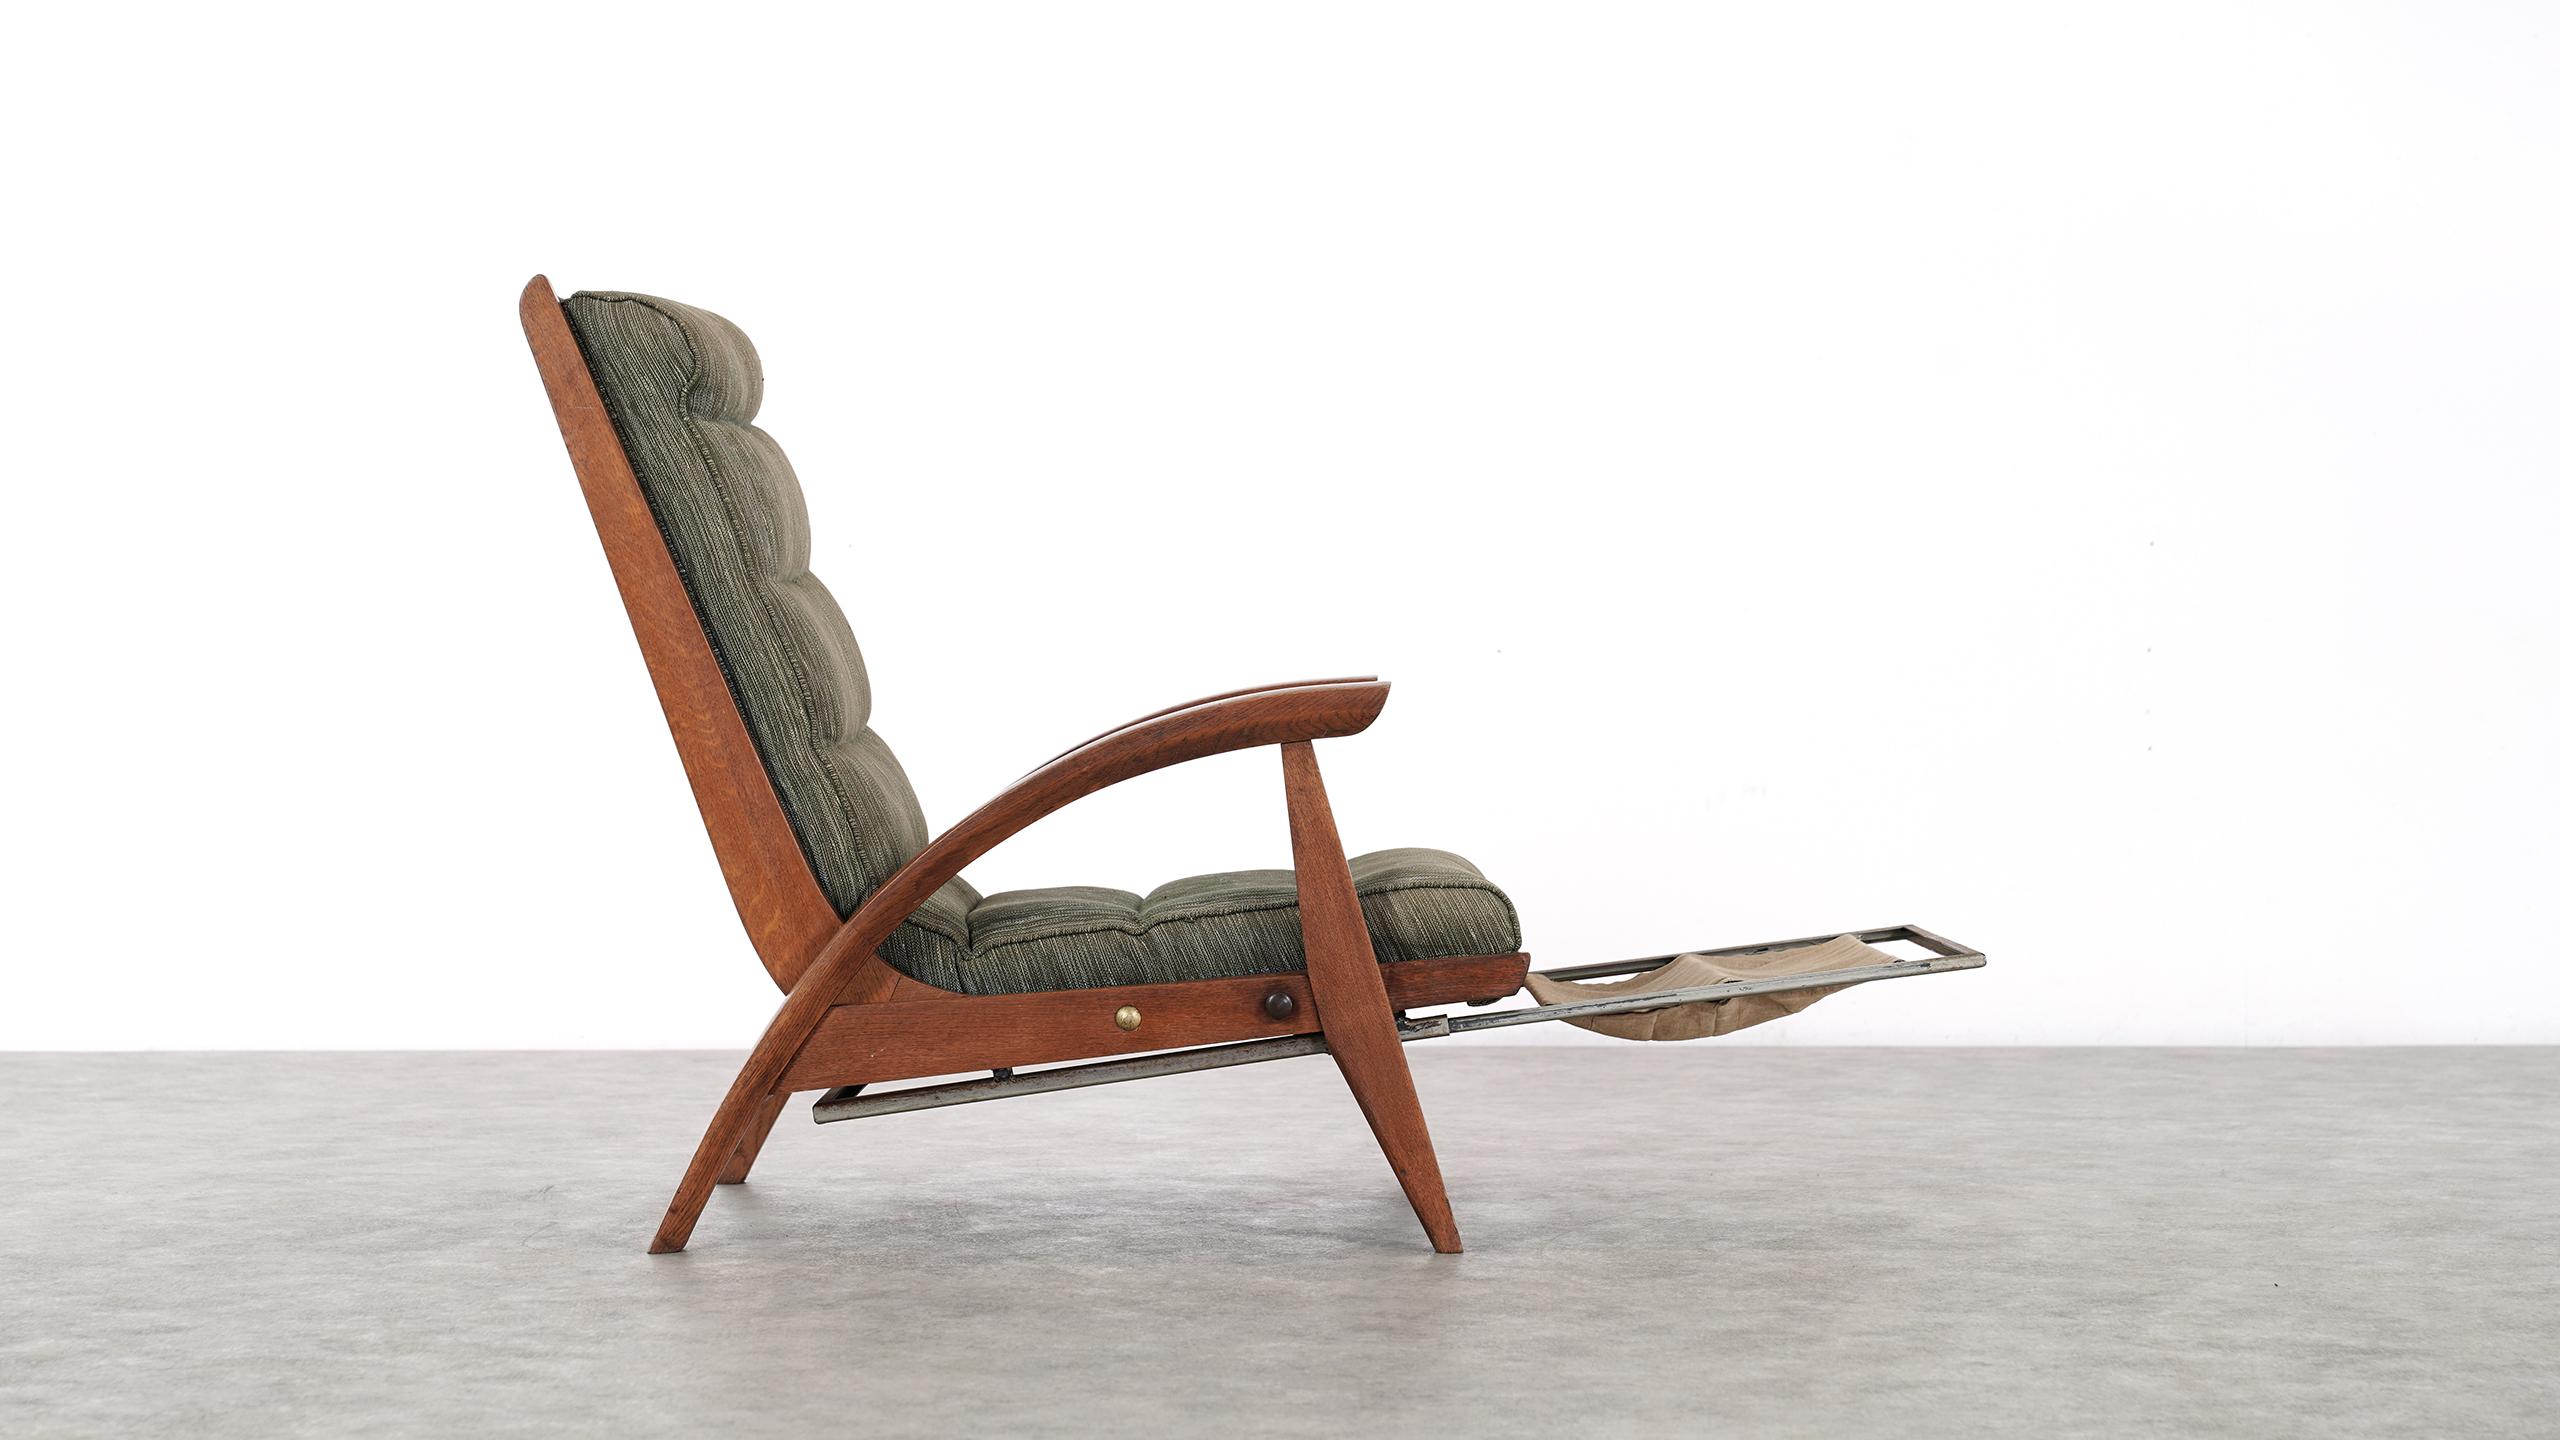 Mid-20th Century Guy Besnard FS 134 Reclining Lounge Chair, 1954 for Free Span, France Prouvé